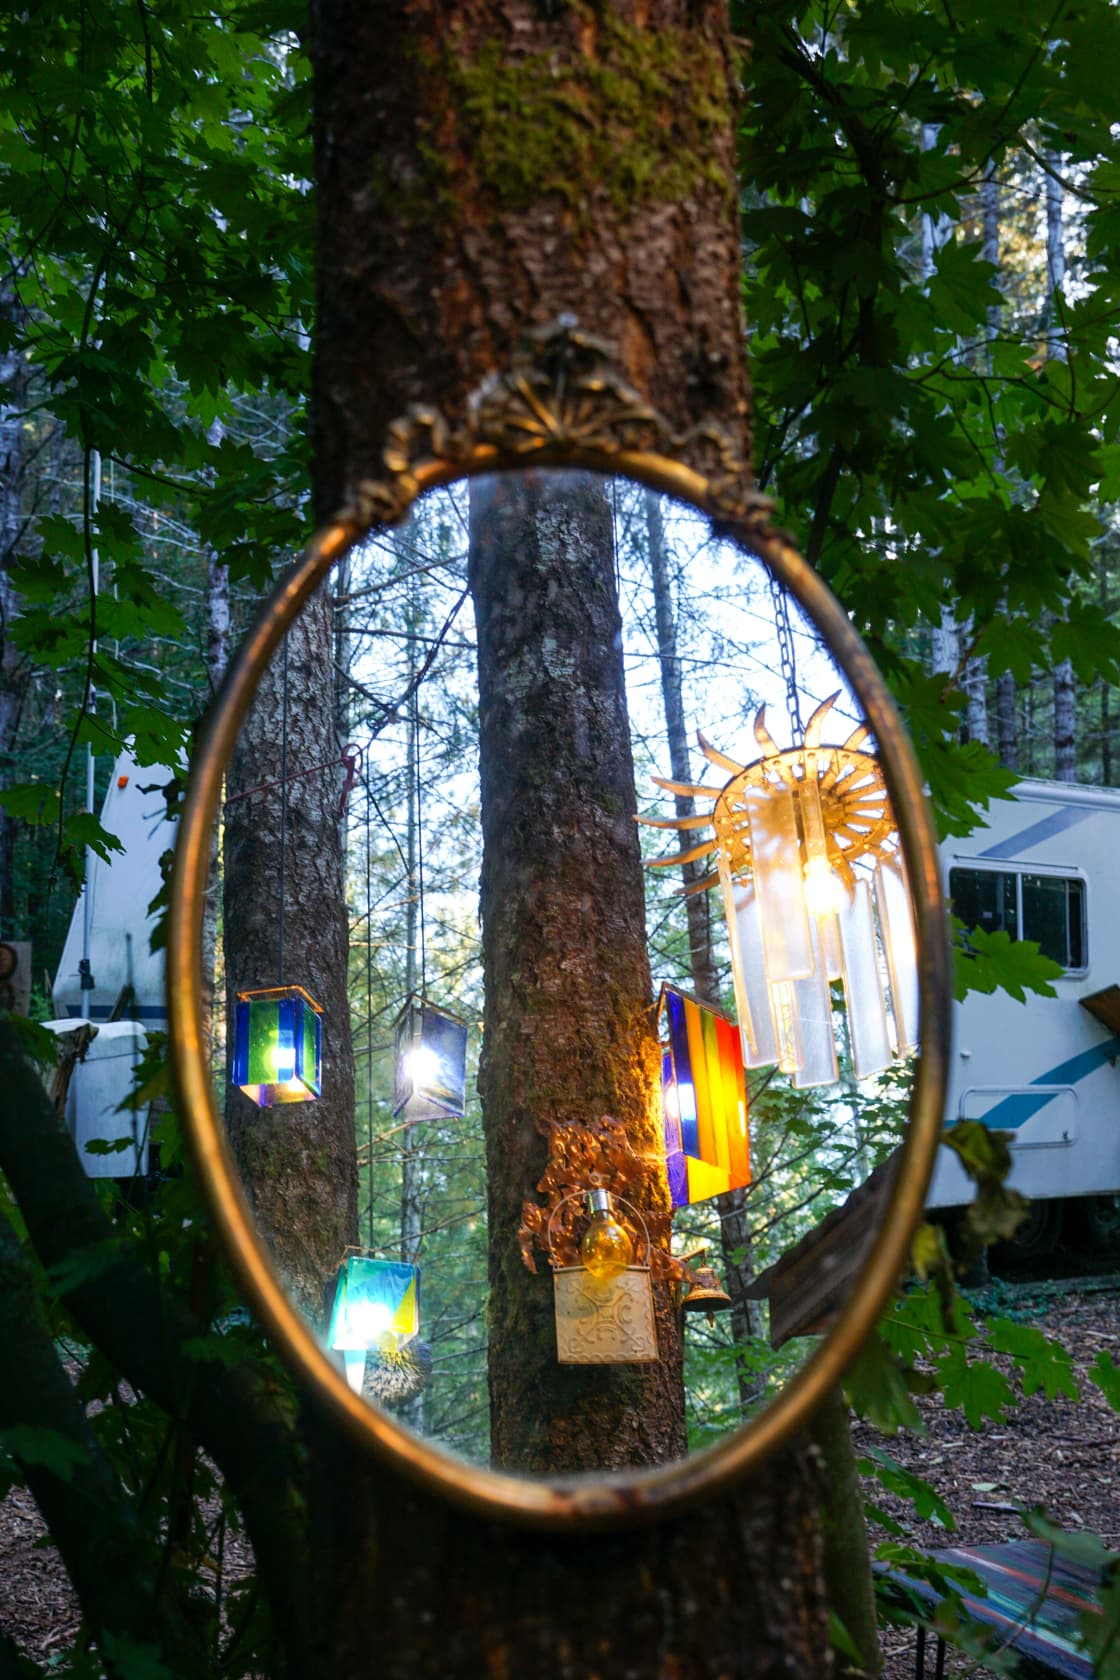 Whimsical glass lights by Gary!